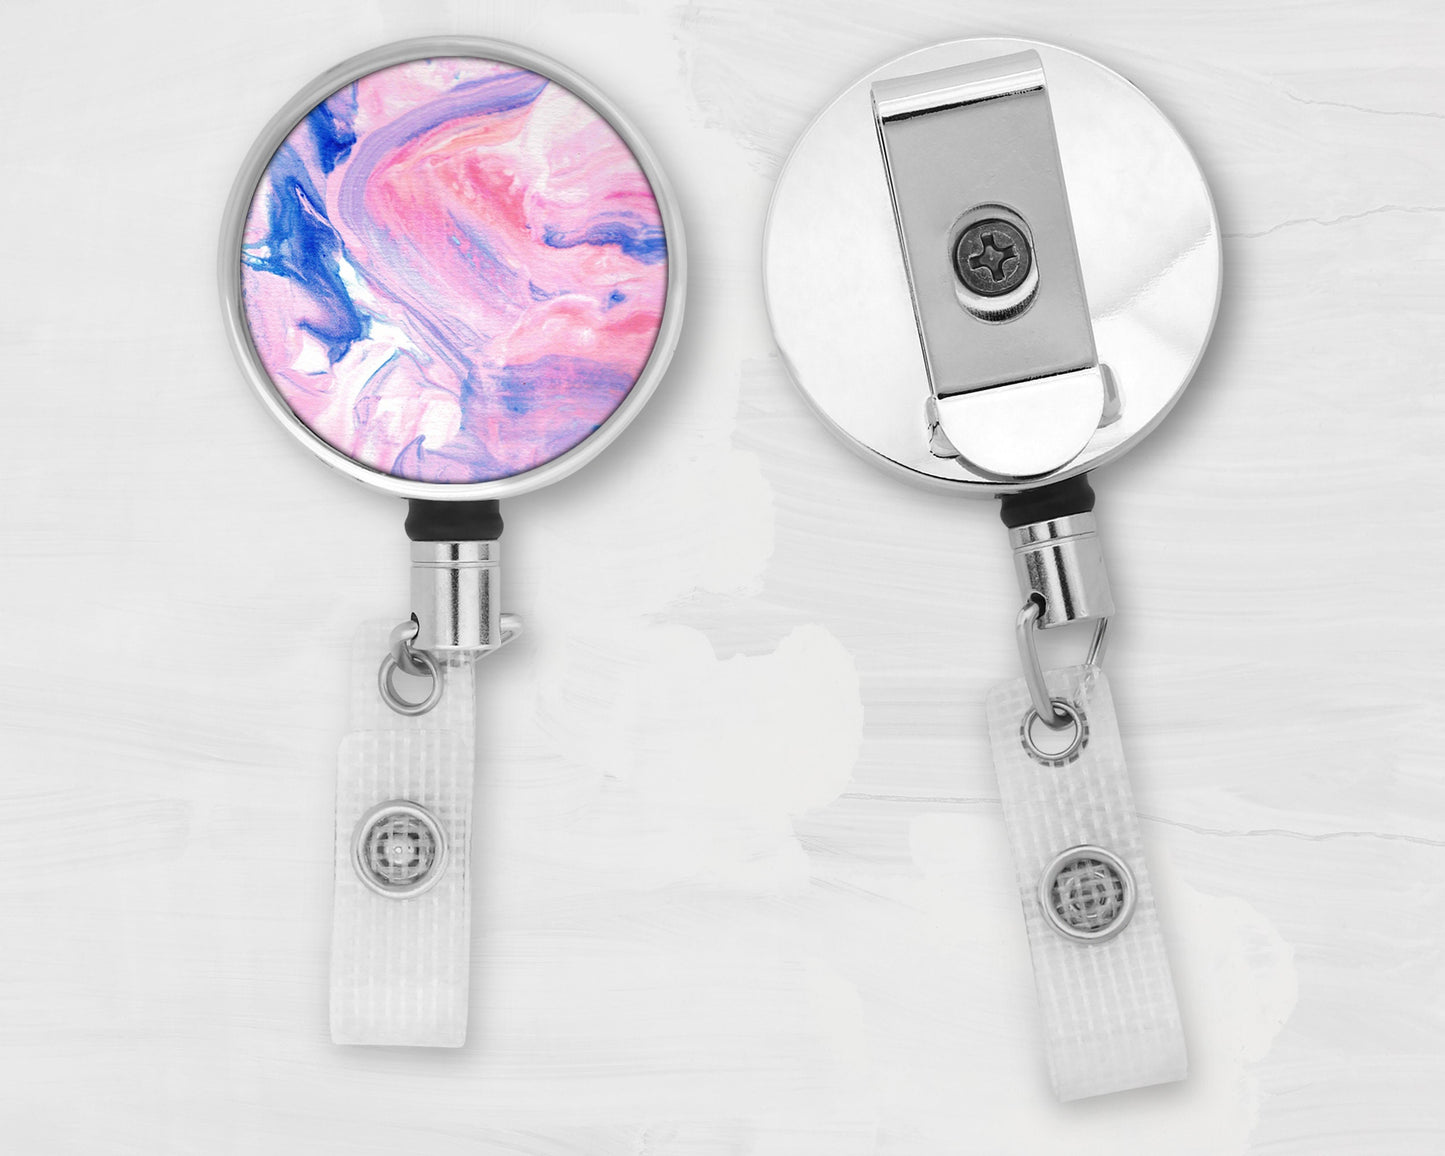 Pink and Blue Abstract Art Badge Reel - Infant Diseases, Miscarriage, Child Loss, Hyperemesis Gravidarum, SIDS, Premature Birth